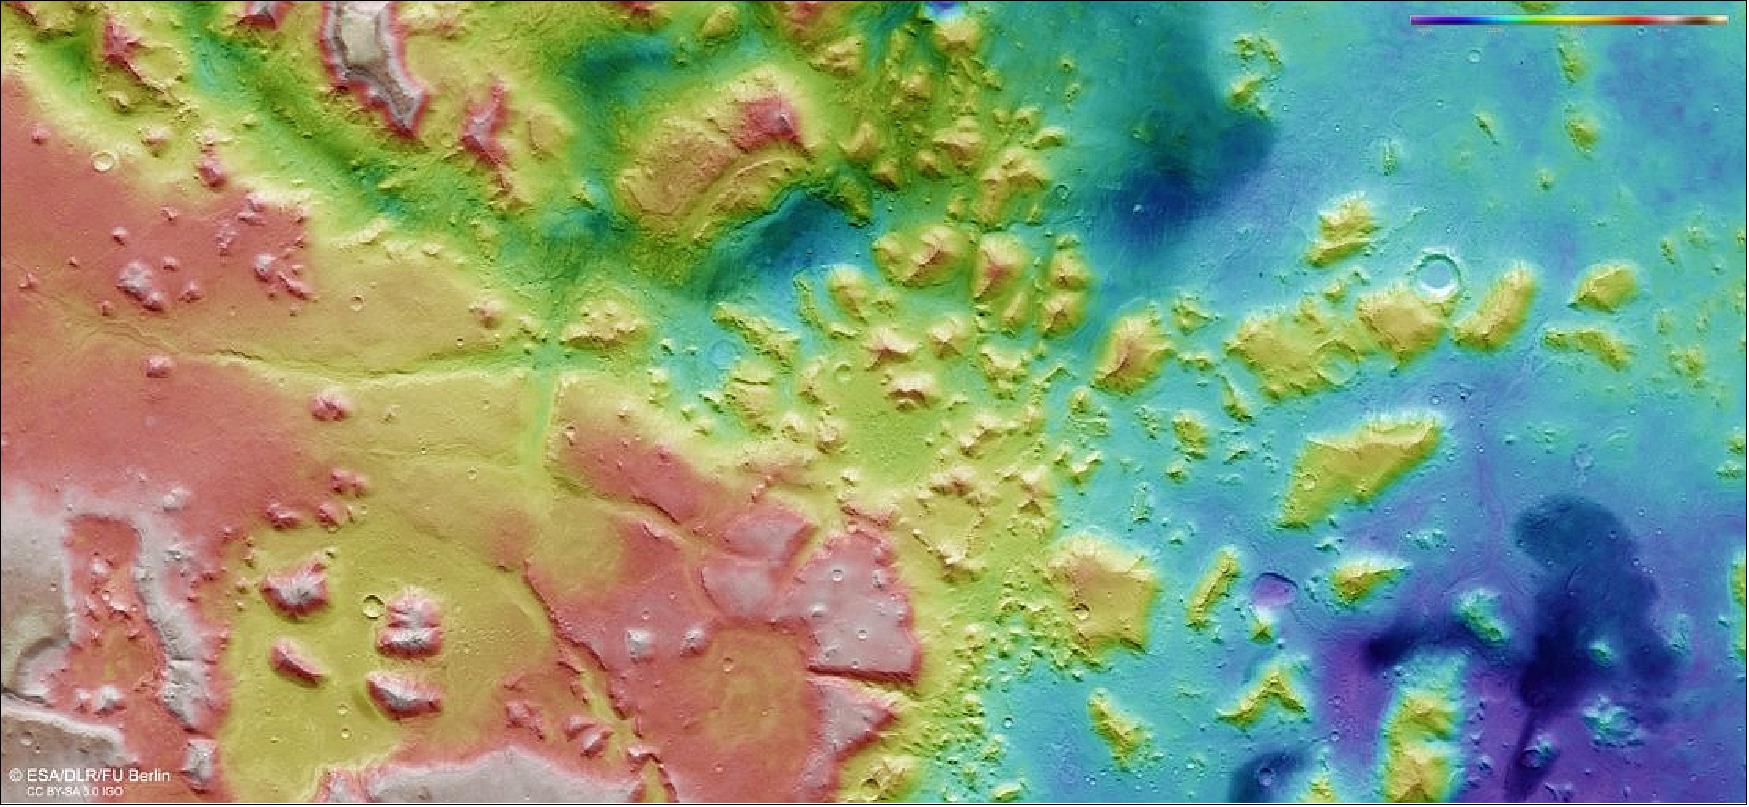 Figure 67: This image shows the relative heights of the landscape in and around Nili Fossae, an escarpment sitting between the northern lowlands and southern highlands of Mars. The lower parts of the surface are shown in blues and purples, while higher-altitude regions show up in whites, browns, and reds, as indicated on the scale to the top right (image credit: ESA/DLR/FU Berlin, CC BY-SA 3.0 IGO)